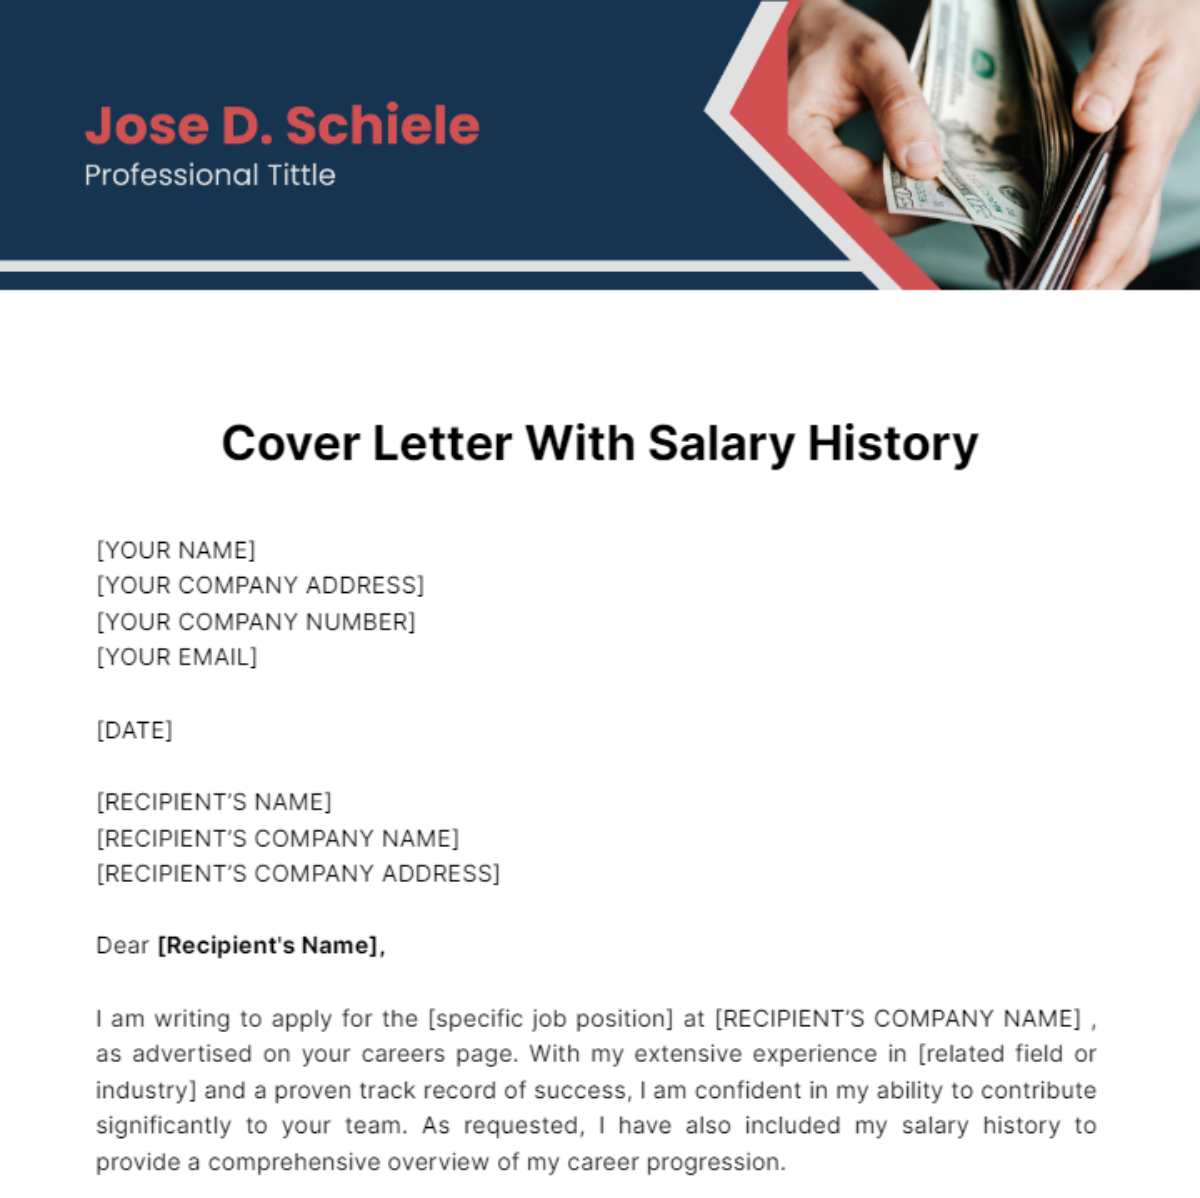 Cover Letter With Salary History Template